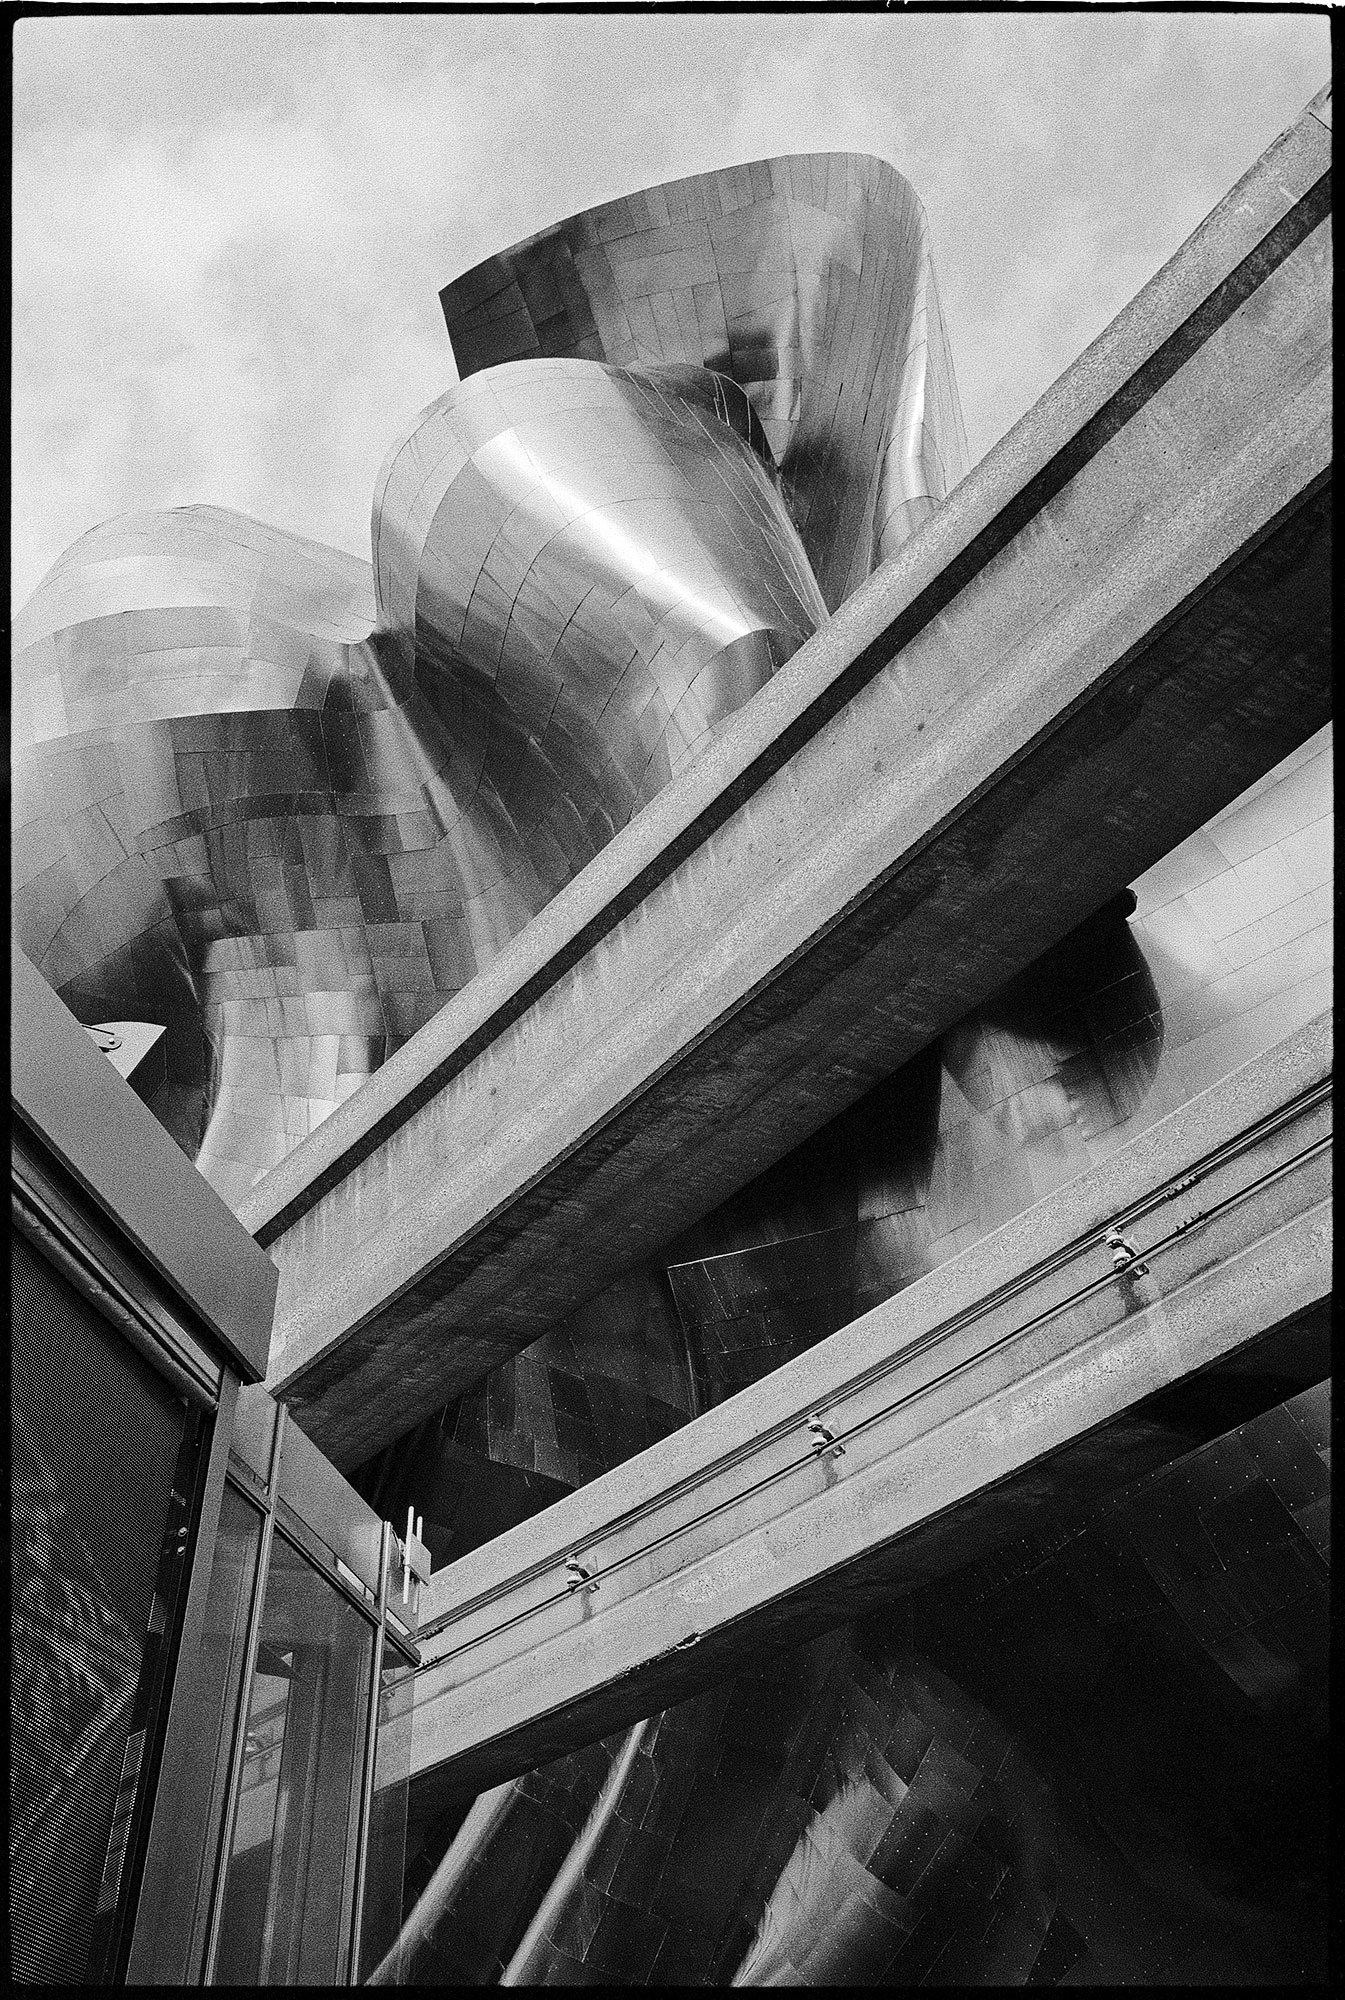 frank gehry “MoPoP” building, seattle